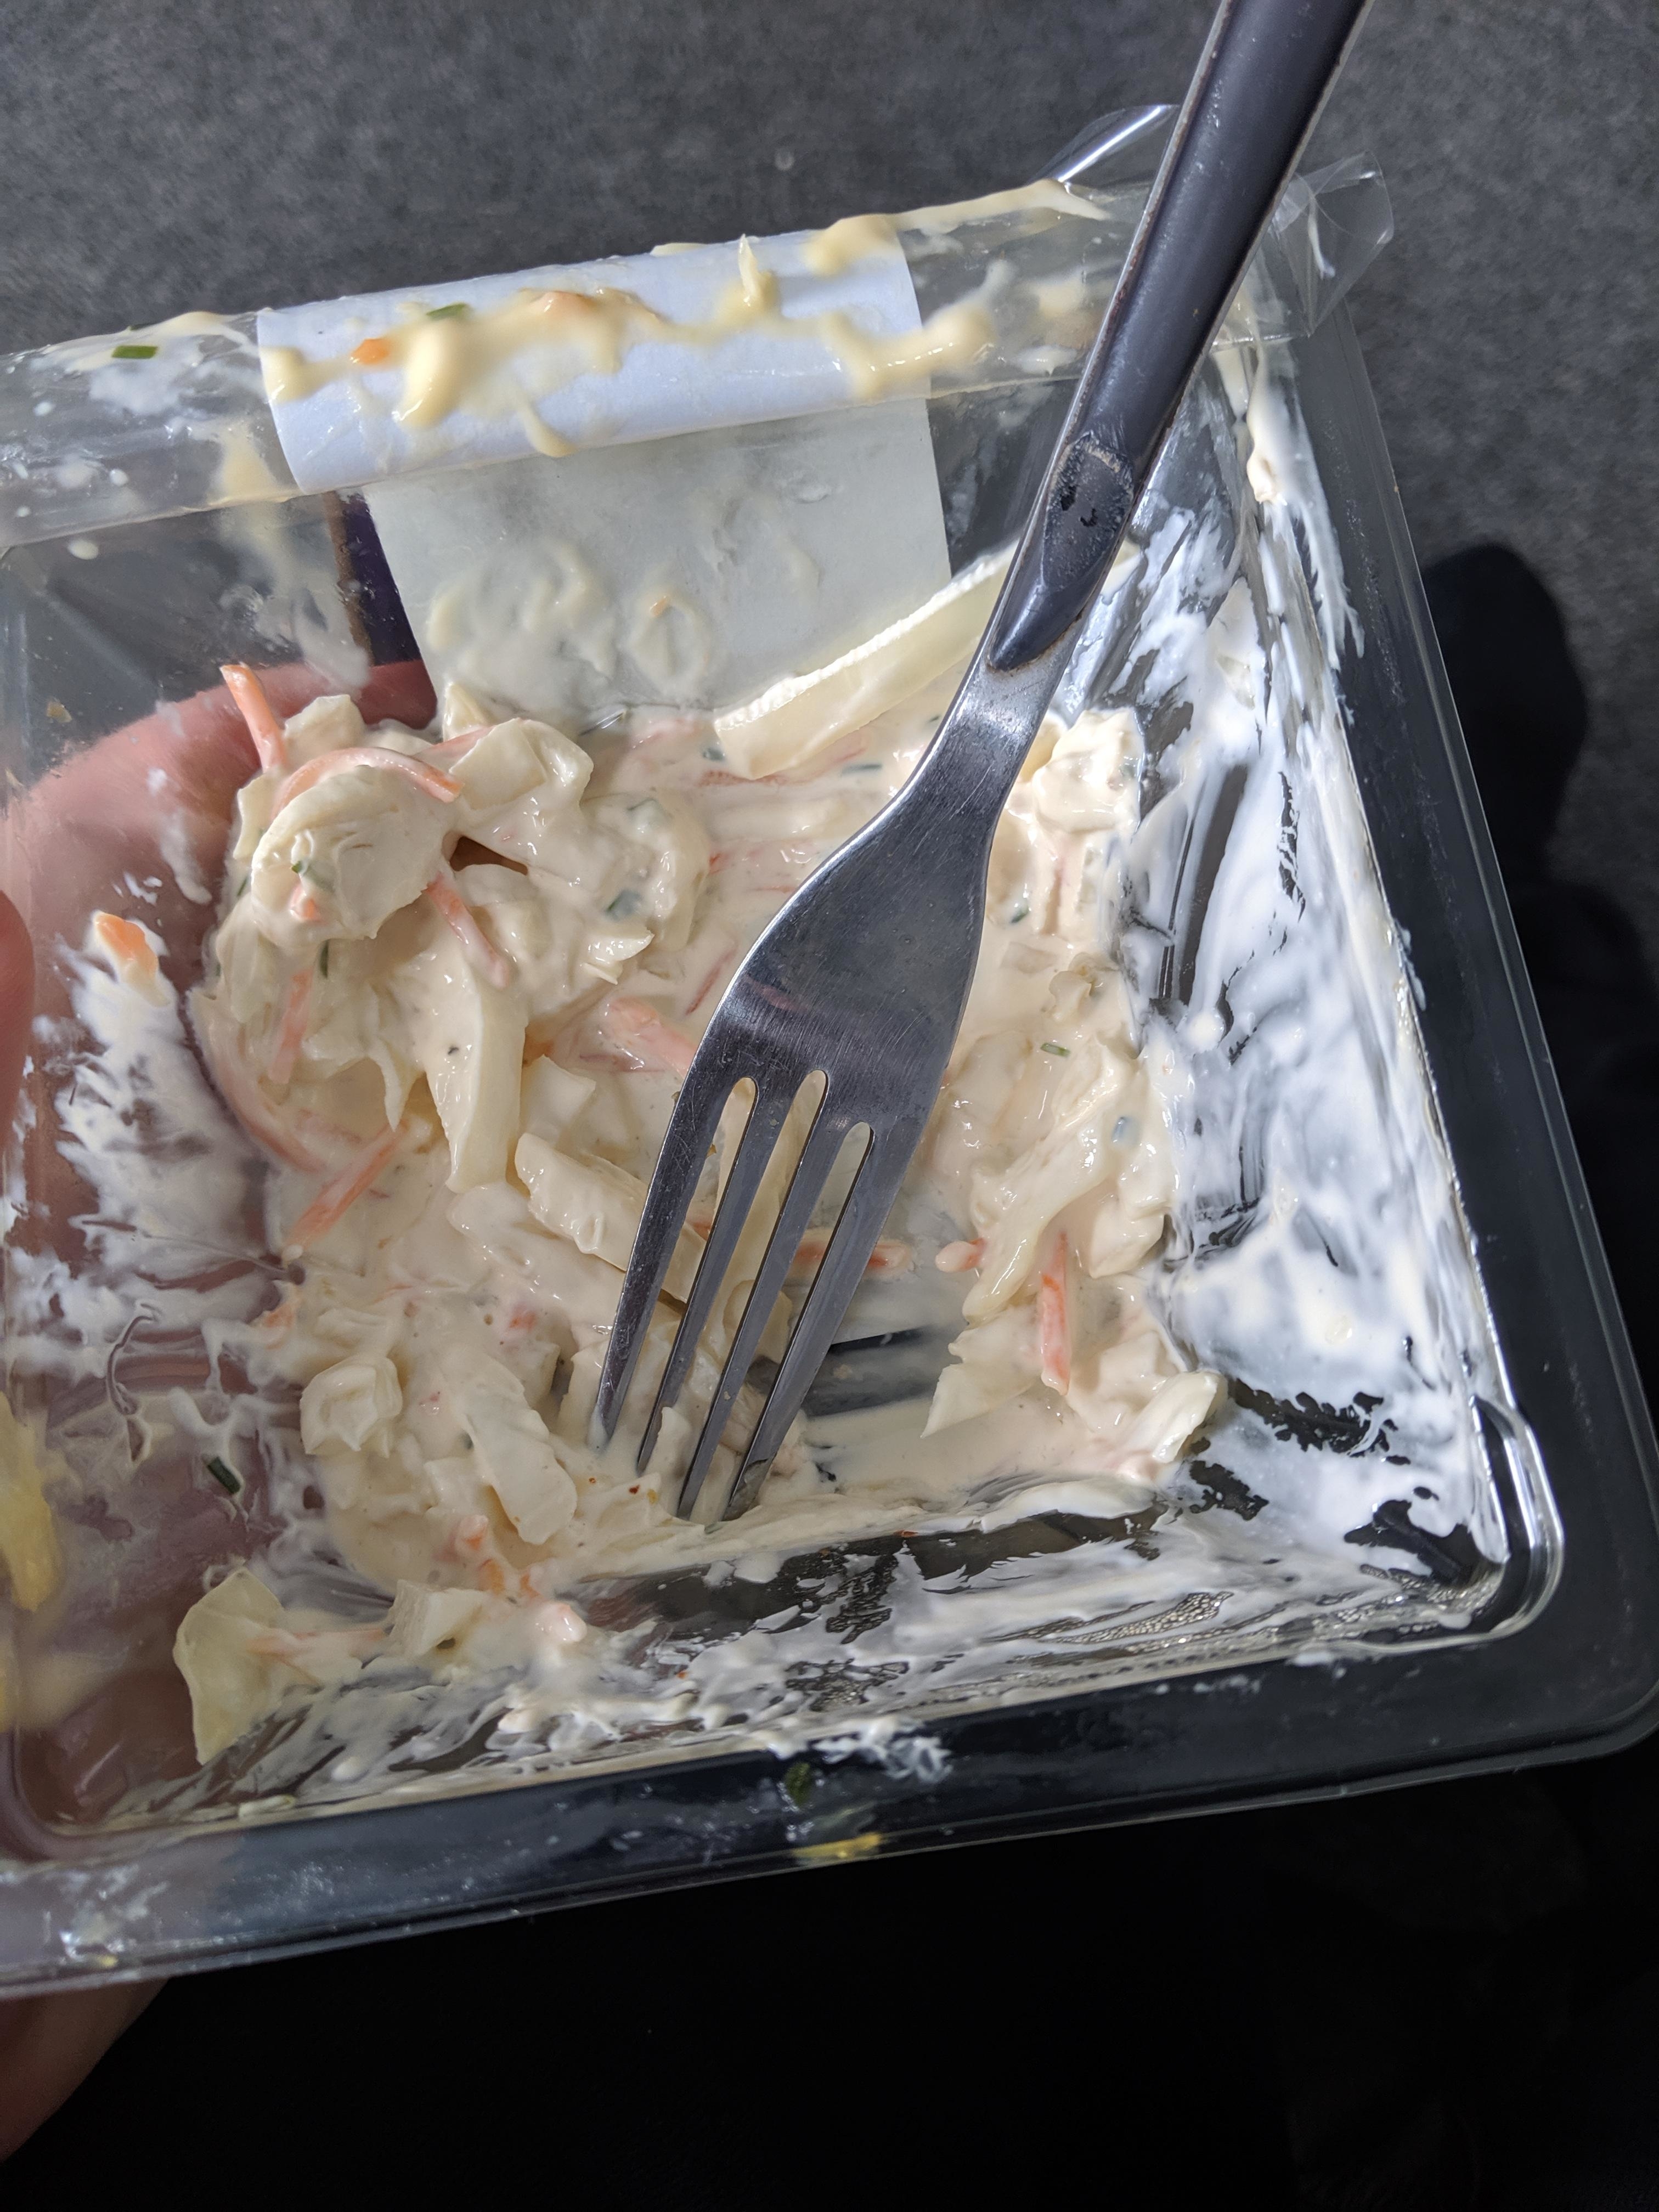 A person holding a plastic container with leftover coleslaw and a fork